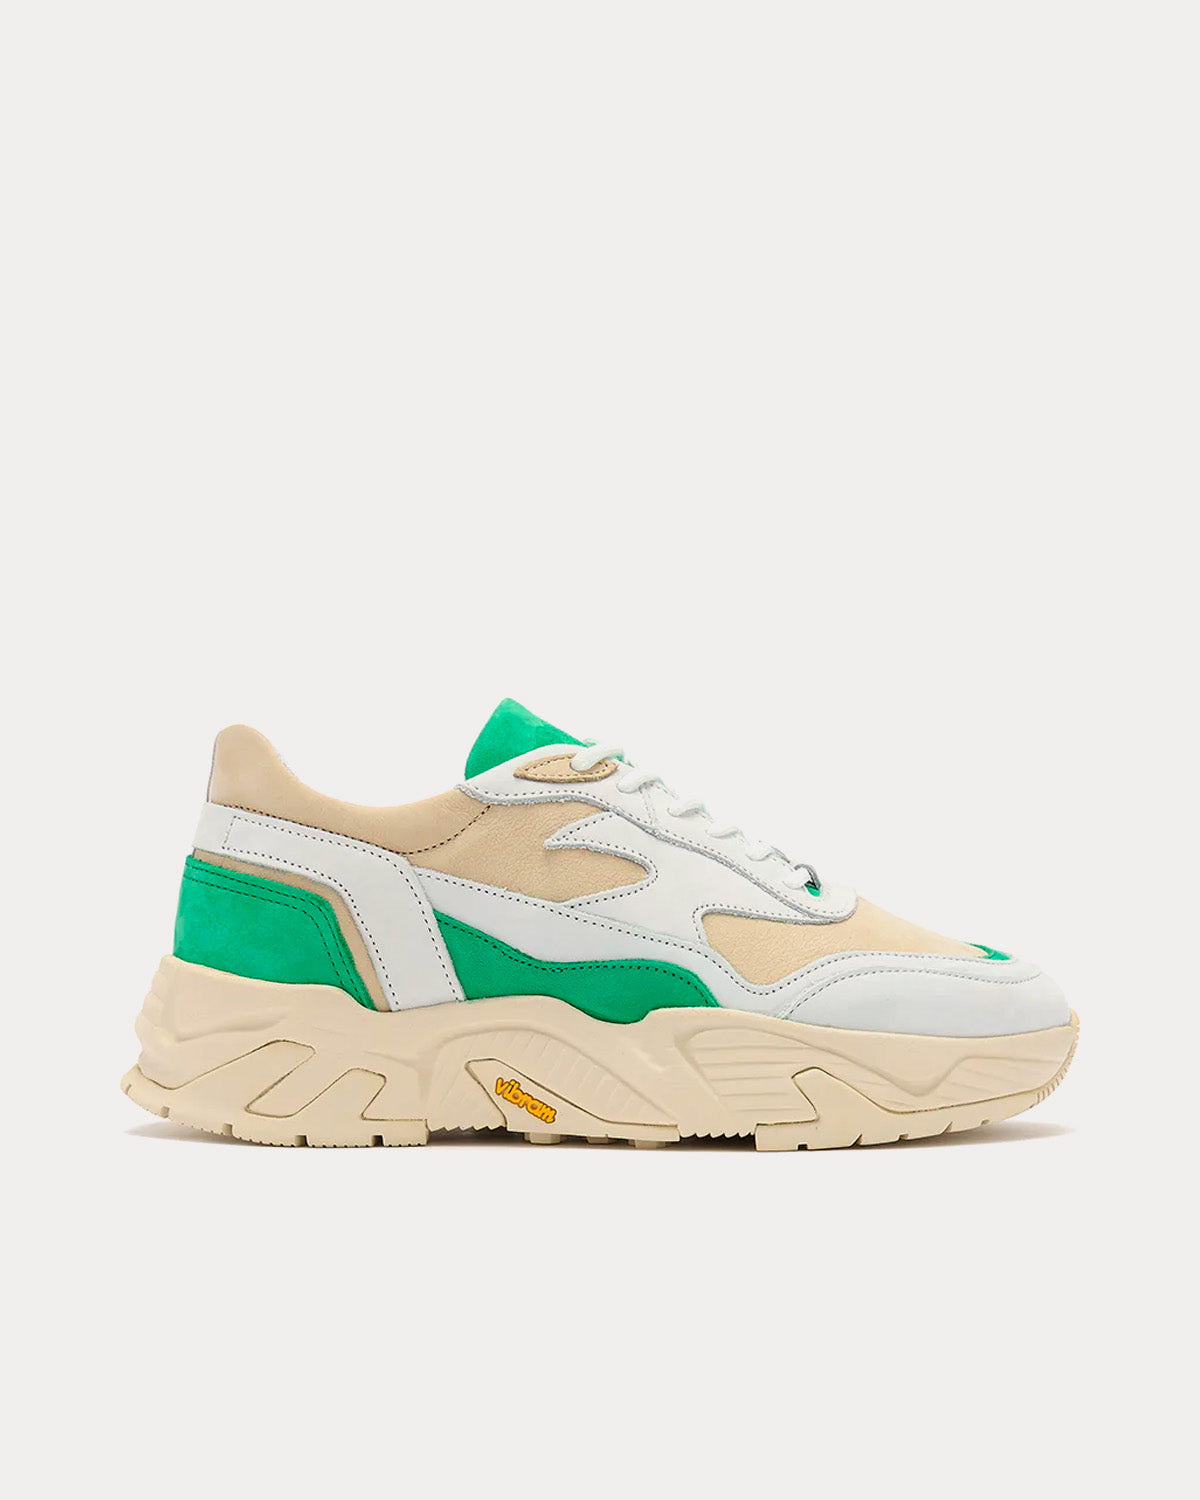 Soho Grit - The Hollen Light Green / Stone White Top Sneakers